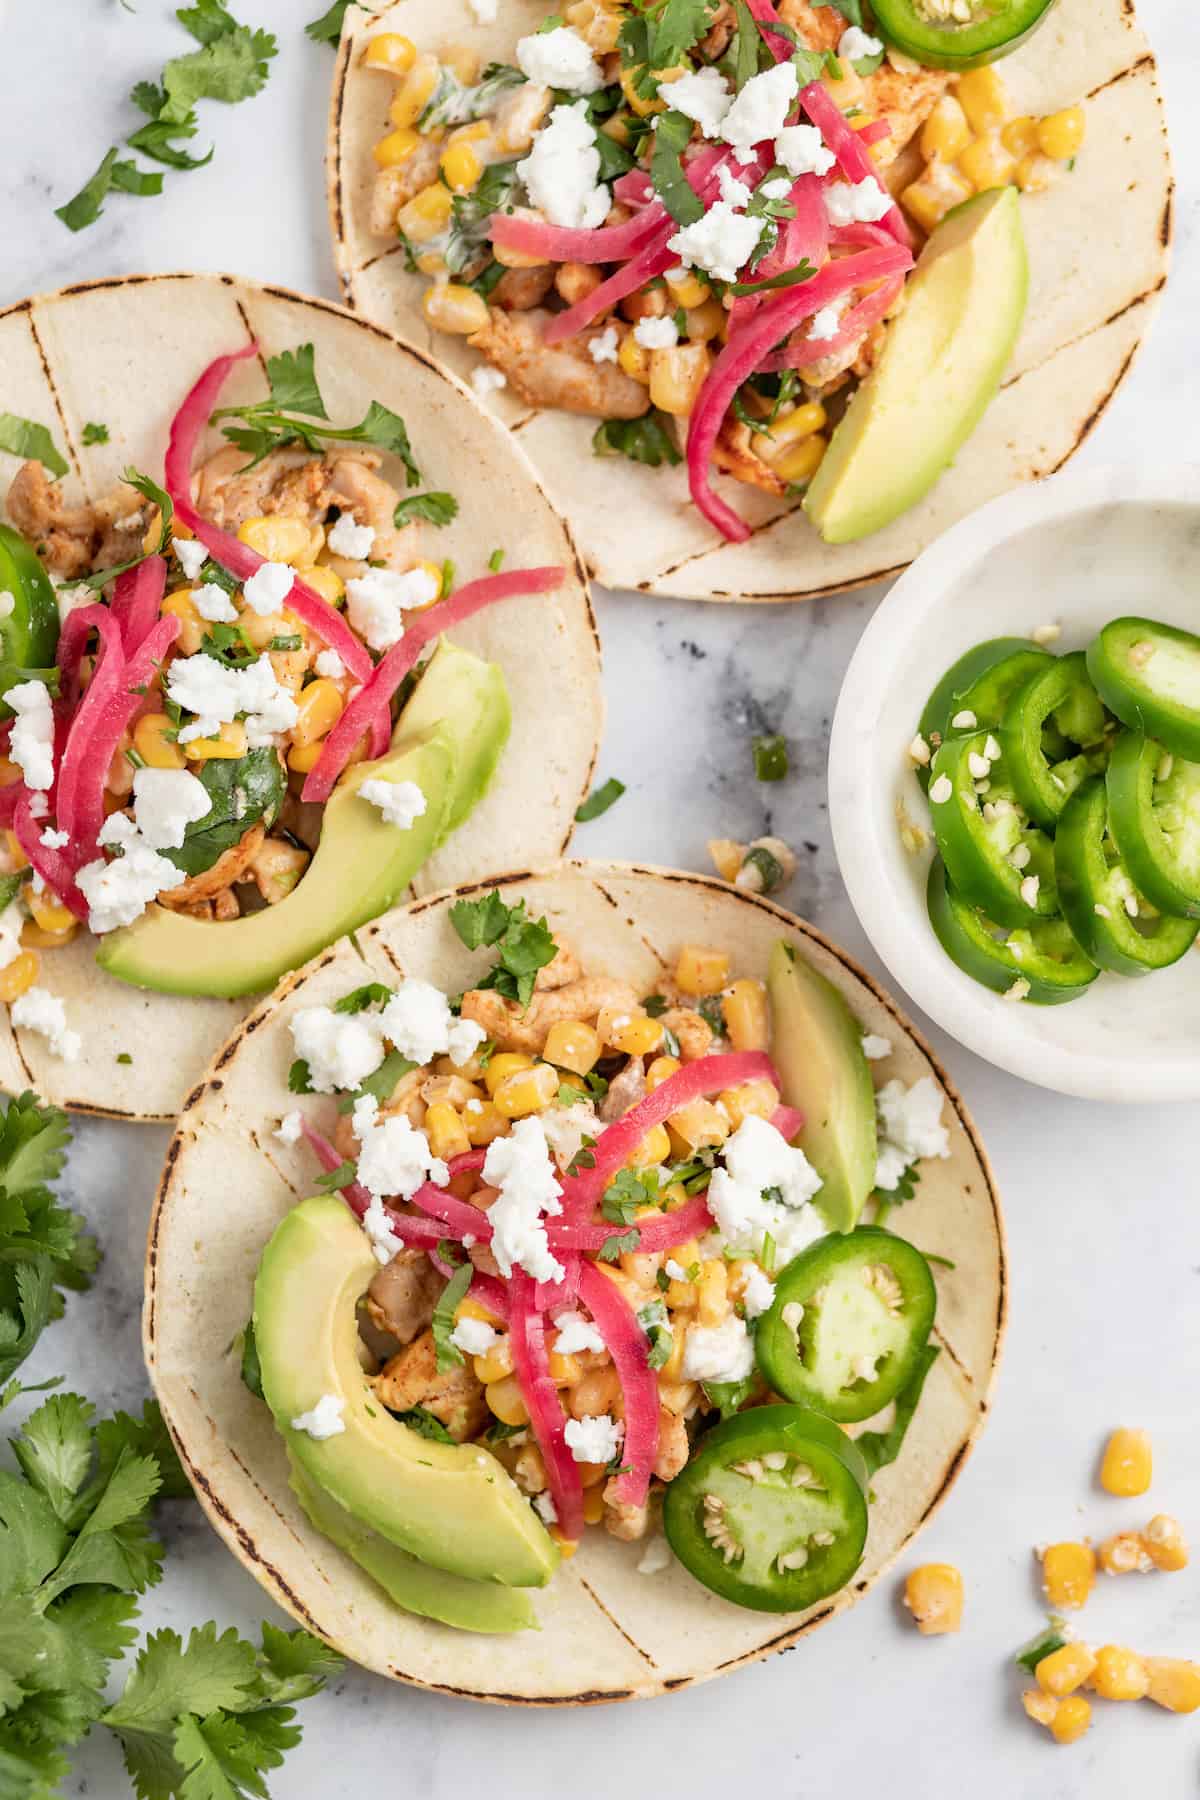 two chicken tacos on a granite counter with pickled onions, chicken, avocado, and corn salad